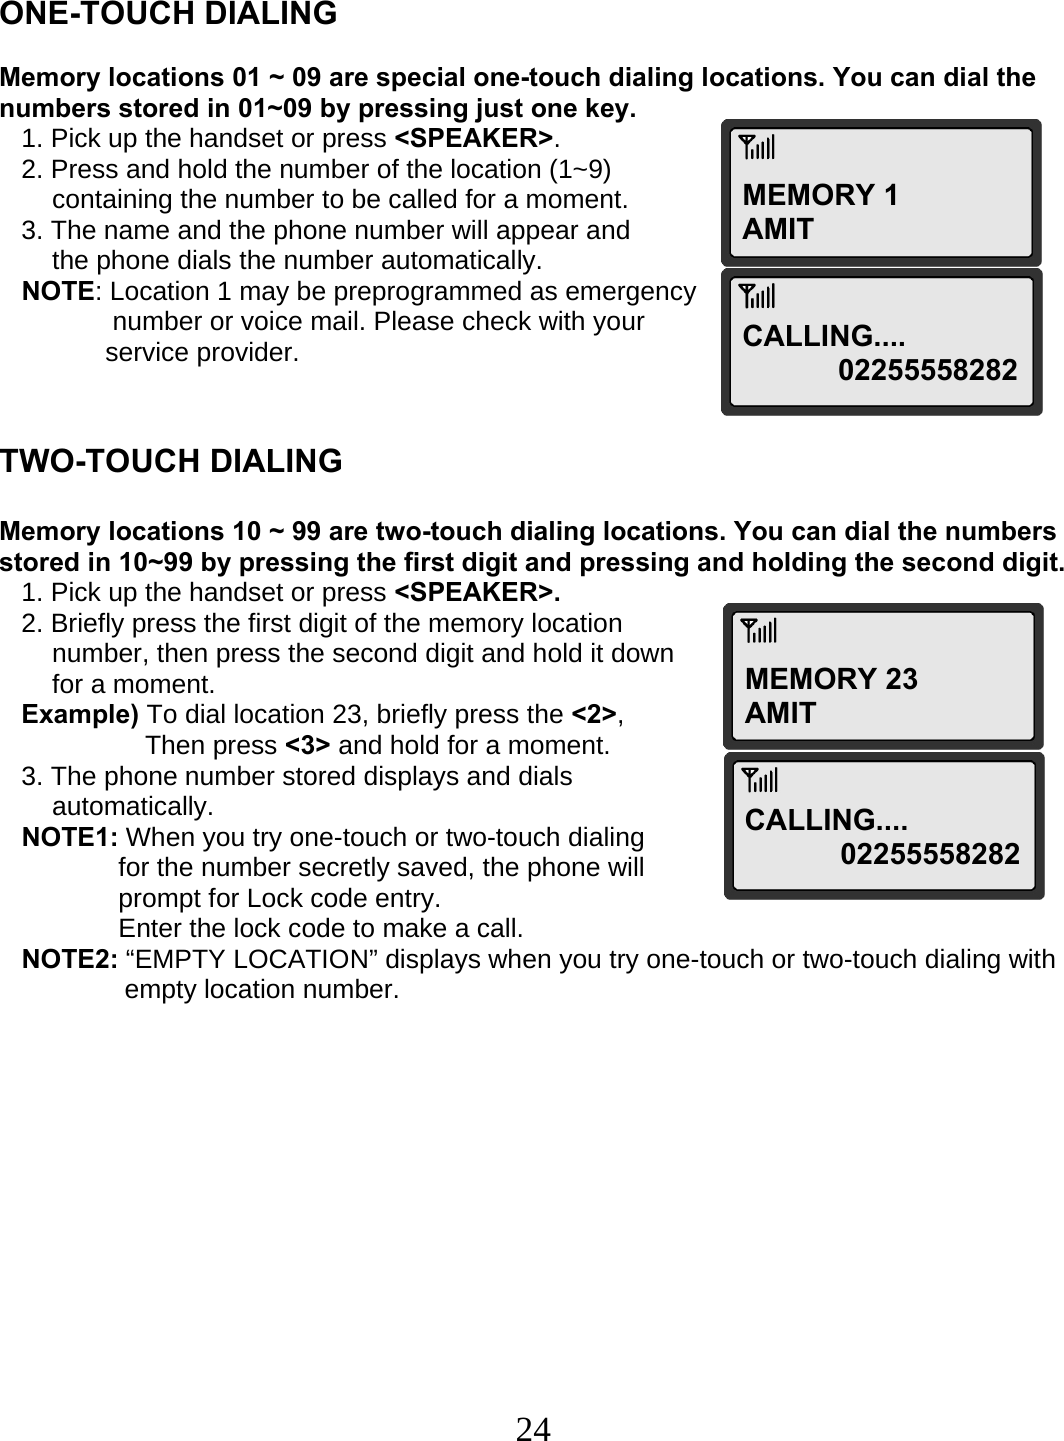  24MEMORY 1 AMIT MEMORY 23 AMIT    ONE-TOUCH DIALING  Memory locations 01 ~ 09 are special one-touch dialing locations. You can dial the numbers stored in 01~09 by pressing just one key.    1. Pick up the handset or press &lt;SPEAKER&gt;.    2. Press and hold the number of the location (1~9)  containing the number to be called for a moment.    3. The name and the phone number will appear and the phone dials the number automatically.    NOTE: Location 1 may be preprogrammed as emergency  number or voice mail. Please check with your  service provider.   TWO-TOUCH DIALING  Memory locations 10 ~ 99 are two-touch dialing locations. You can dial the numbers stored in 10~99 by pressing the first digit and pressing and holding the second digit.    1. Pick up the handset or press &lt;SPEAKER&gt;.    2. Briefly press the first digit of the memory location  number, then press the second digit and hold it down  for a moment.    Example) To dial location 23, briefly press the &lt;2&gt;,  Then press &lt;3&gt; and hold for a moment.    3. The phone number stored displays and dials    automatically.    NOTE1: When you try one-touch or two-touch dialing  for the number secretly saved, the phone will  prompt for Lock code entry.  Enter the lock code to make a call.    NOTE2: “EMPTY LOCATION” displays when you try one-touch or two-touch dialing with                   empty location number.  CALLING....  02255558282CALLING....  02255558282